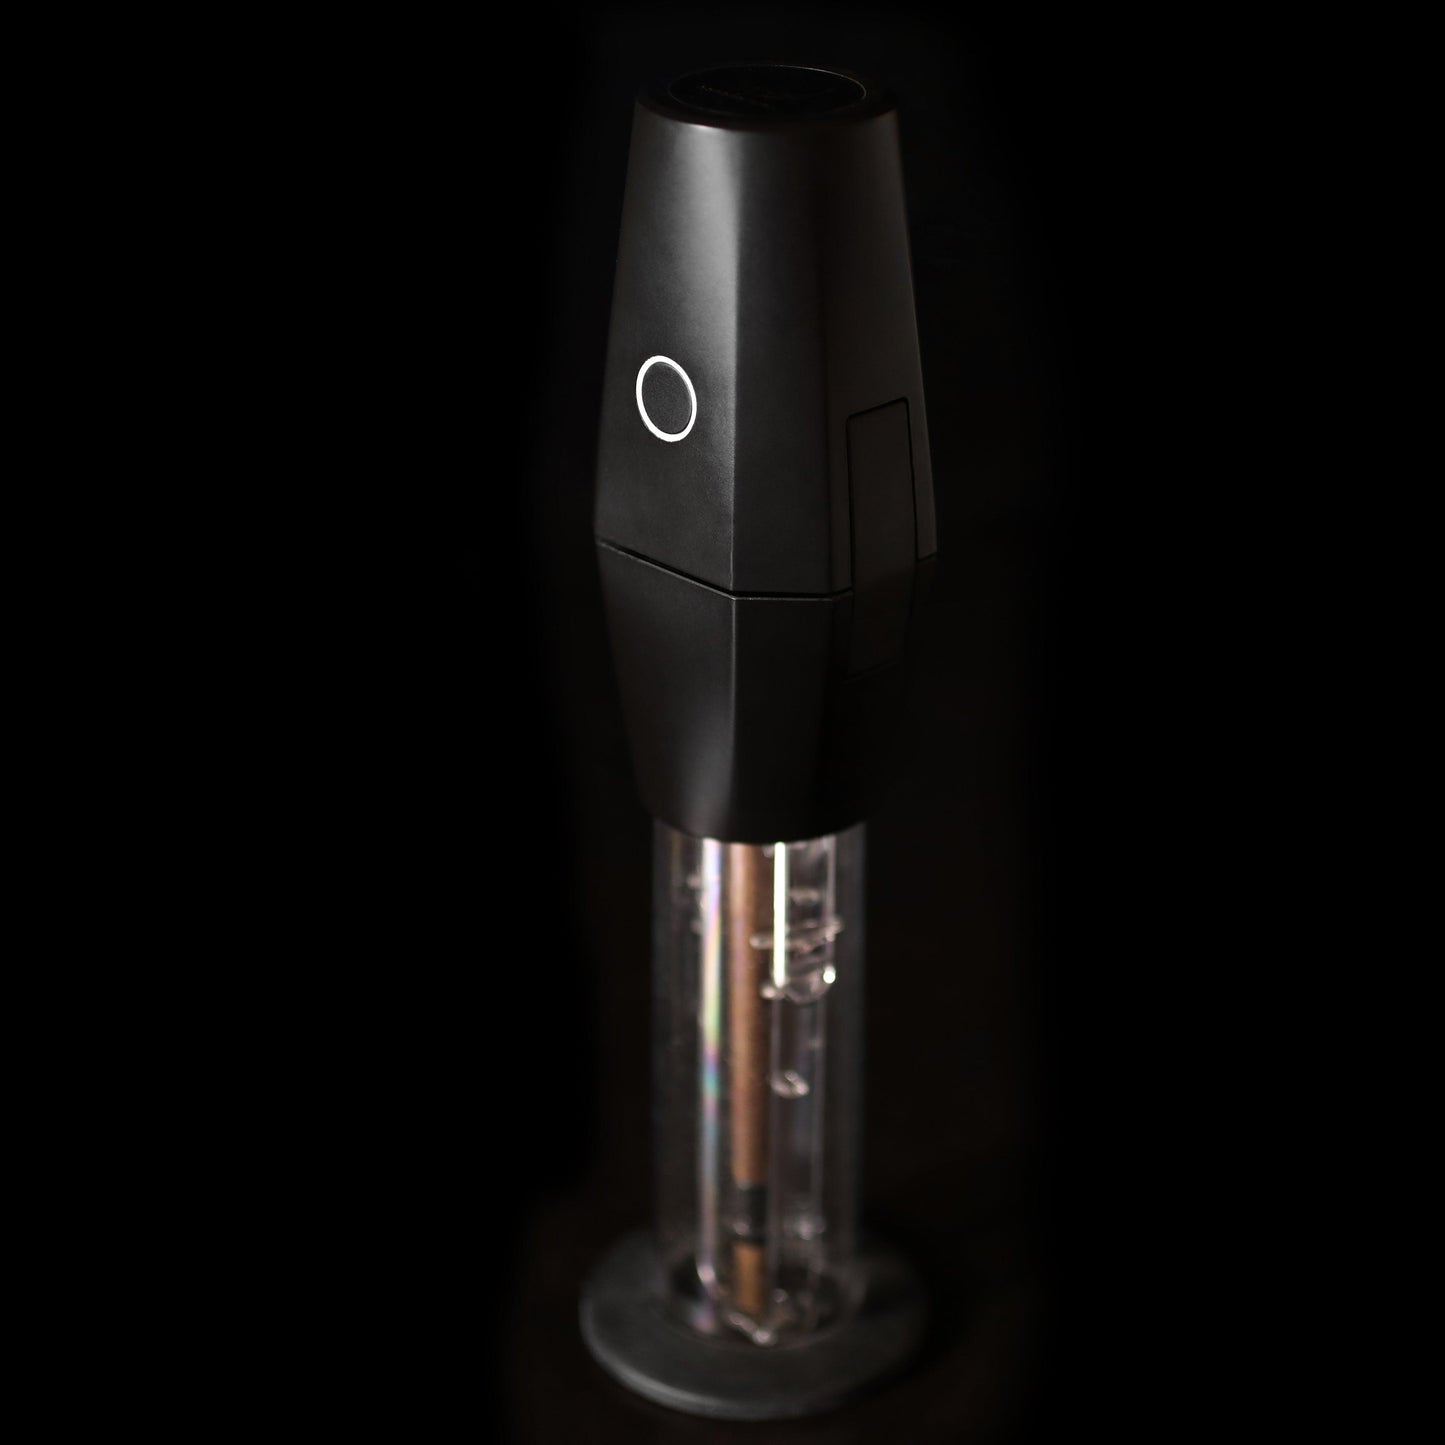 Electric Bud Grinder - Photography and Web Design - Los Angeles, US based Shopify Experts Revo Designs